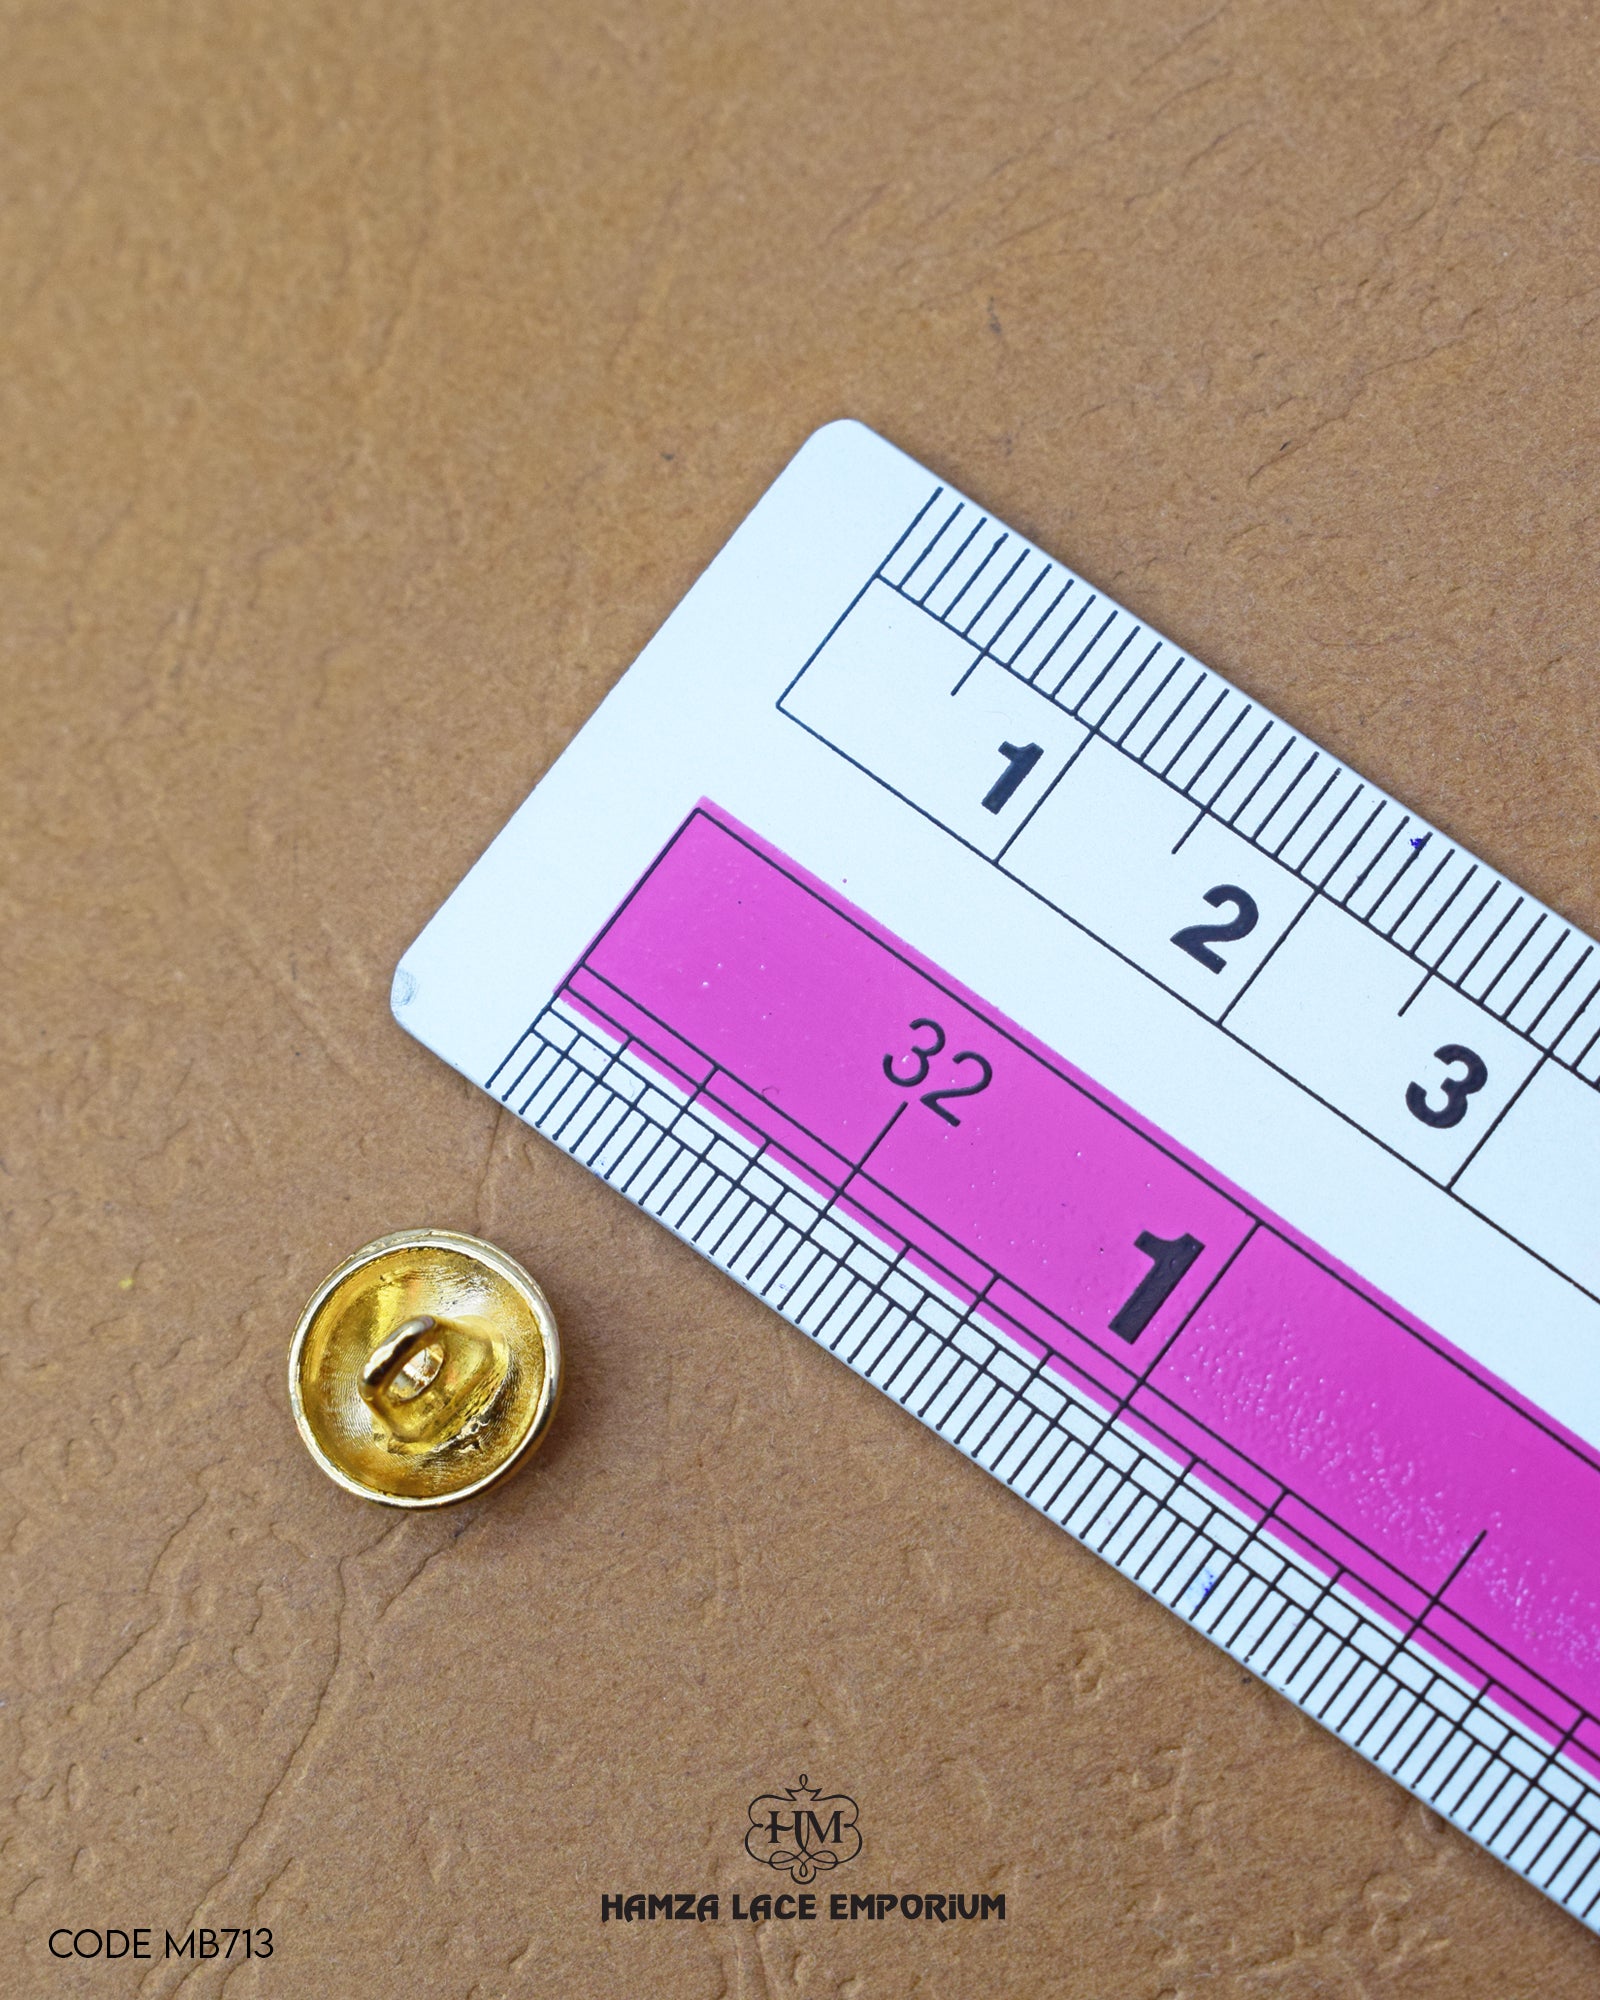 The size of the 'Golden Metal Button MB713' is measured using a ruler.